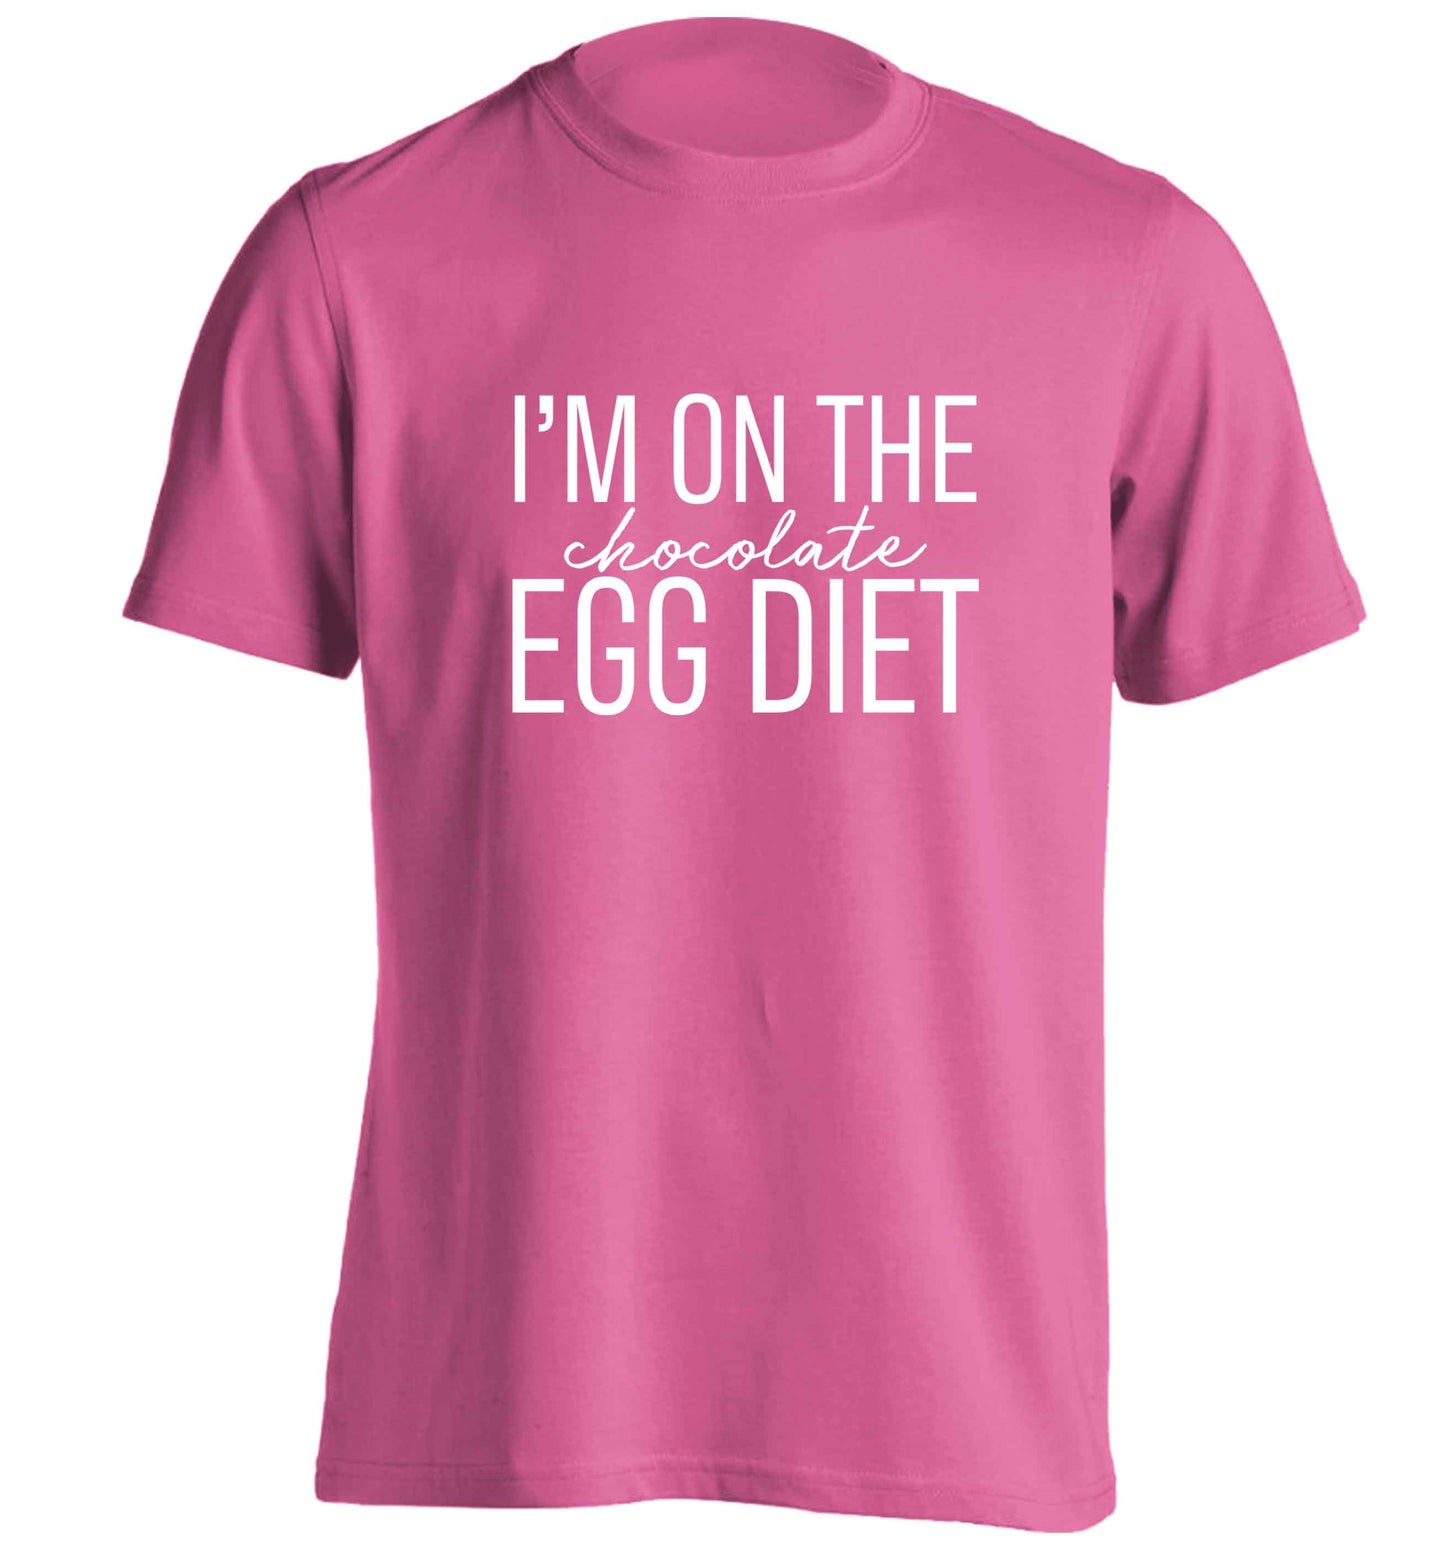 I'm on the chocolate egg diet adults unisex pink Tshirt 2XL